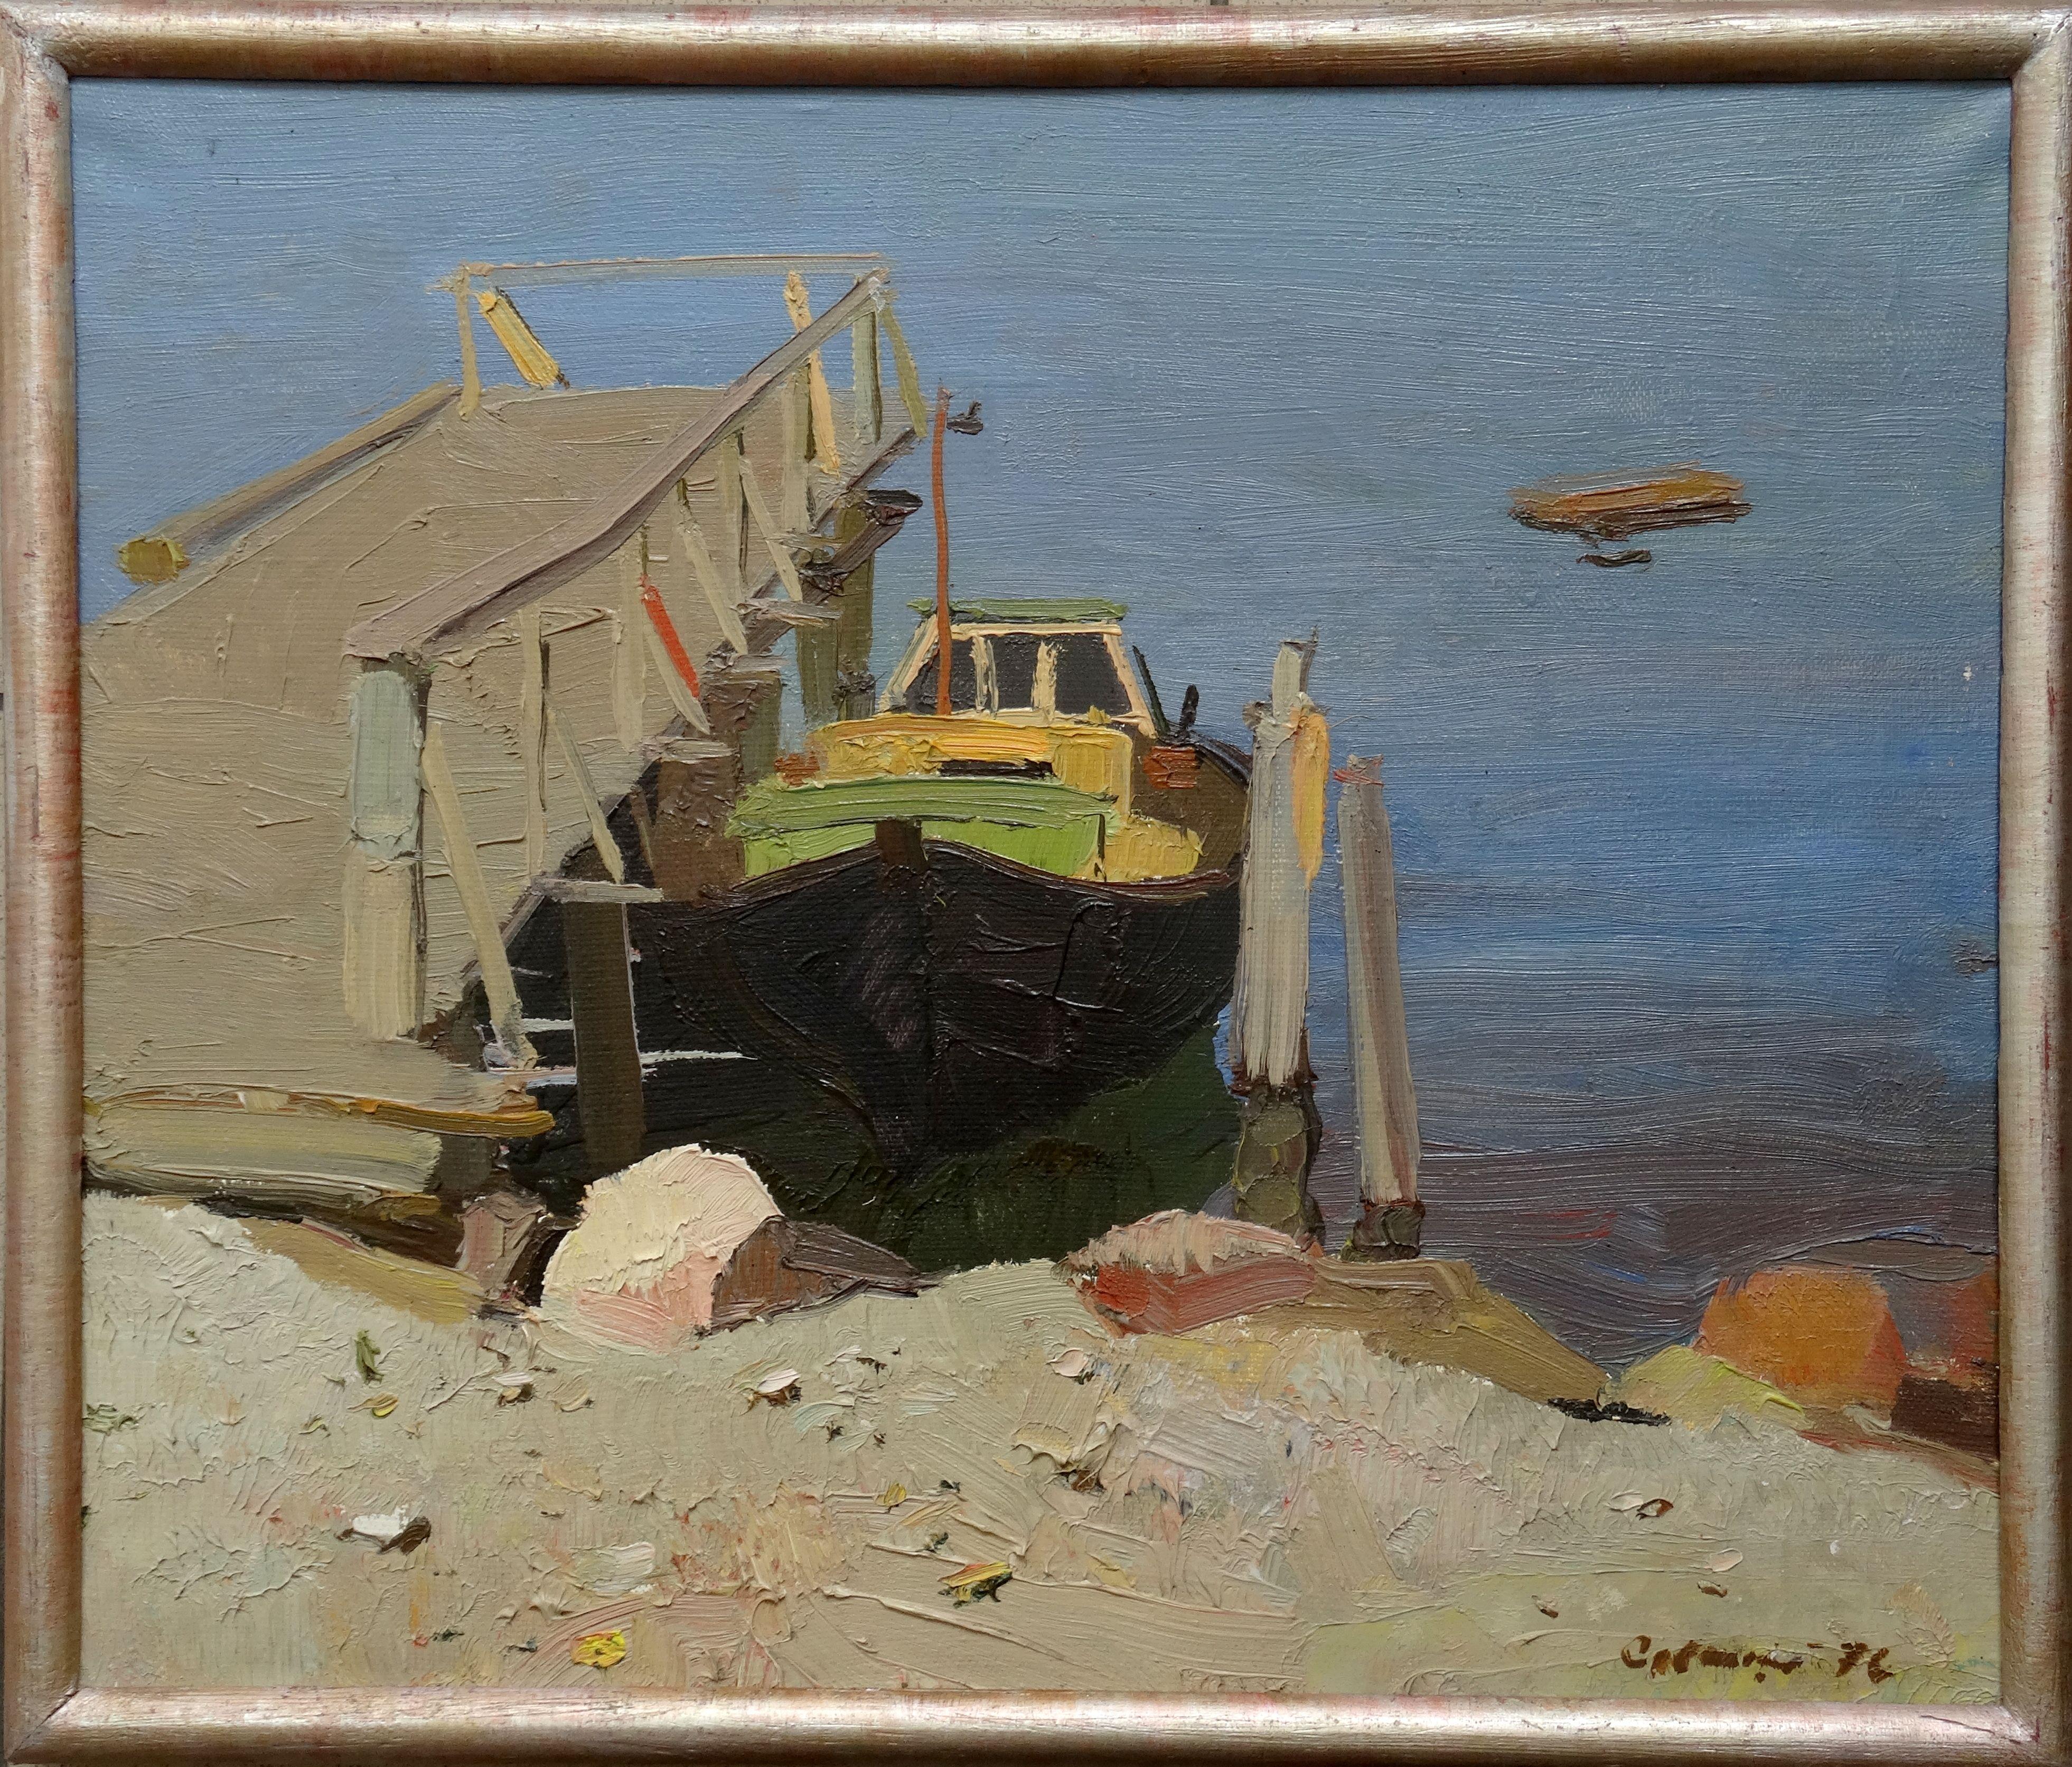 By the footbridge. Canvas, oil, 42.5x50 cm - Painting by Bruno Celmins